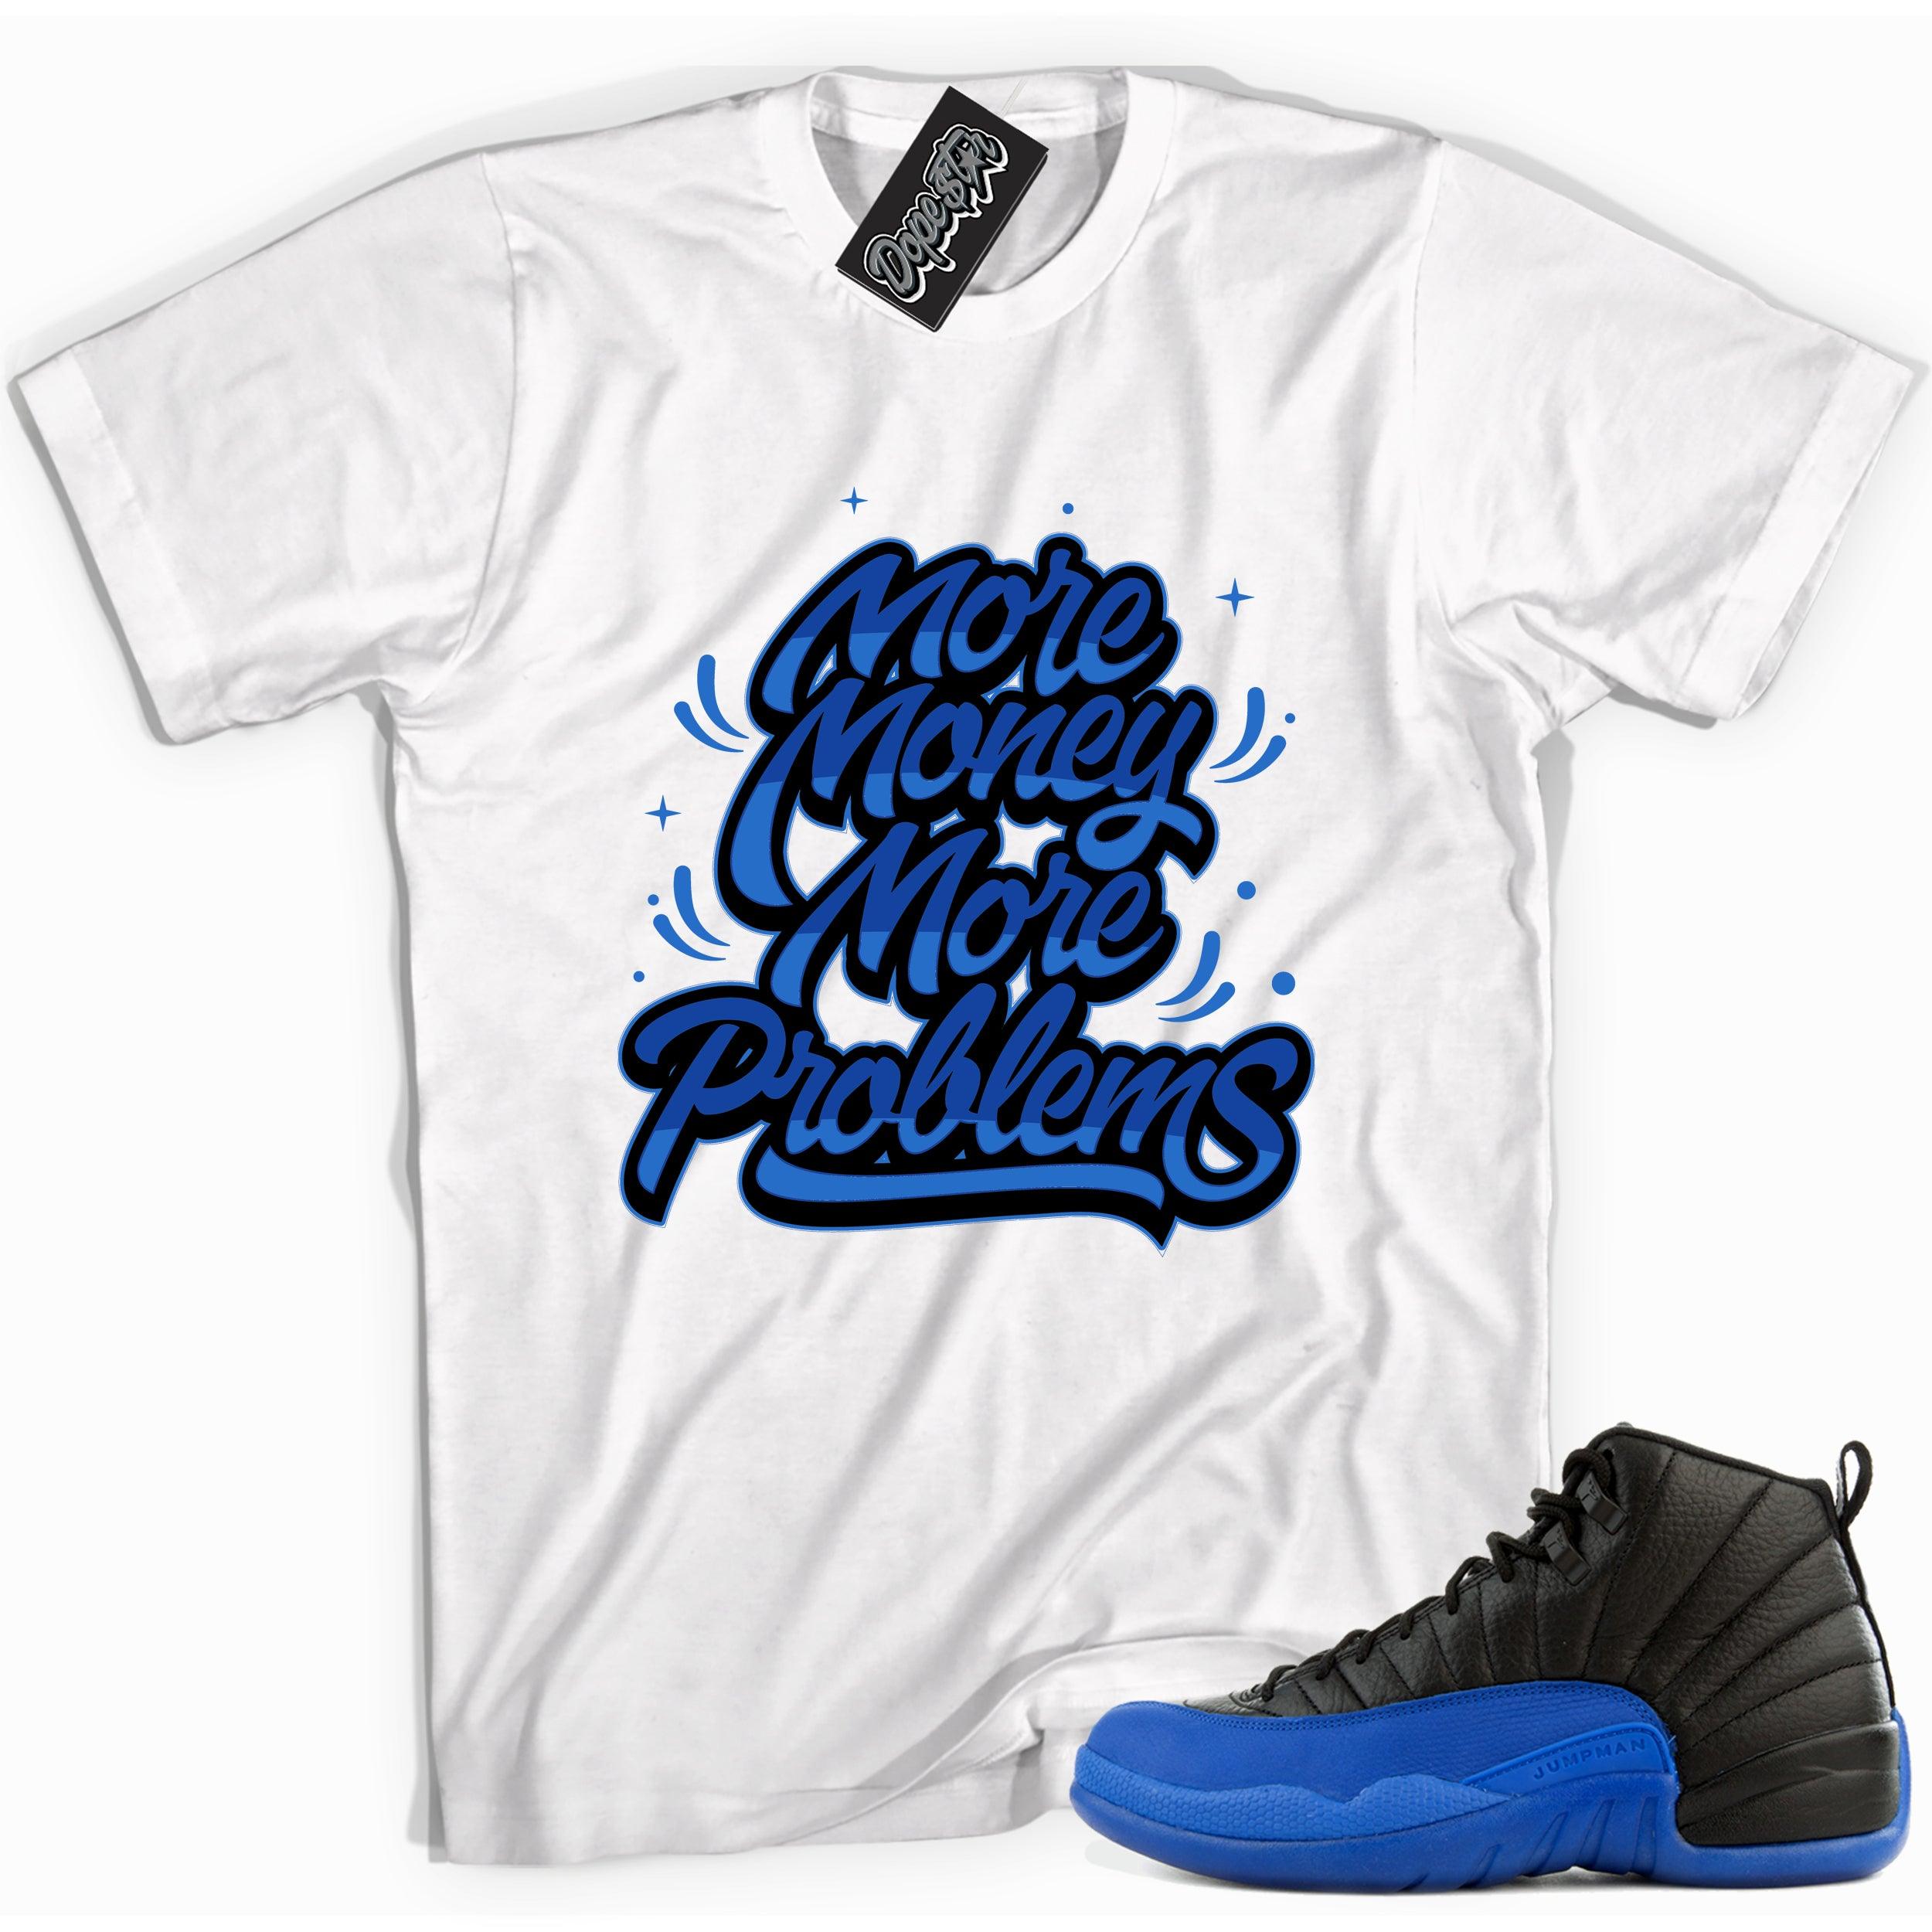 Cool white graphic tee with 'more money more problems' print, that perfectly matches Air Jordan 12 Retro Black Game Royal sneakers.